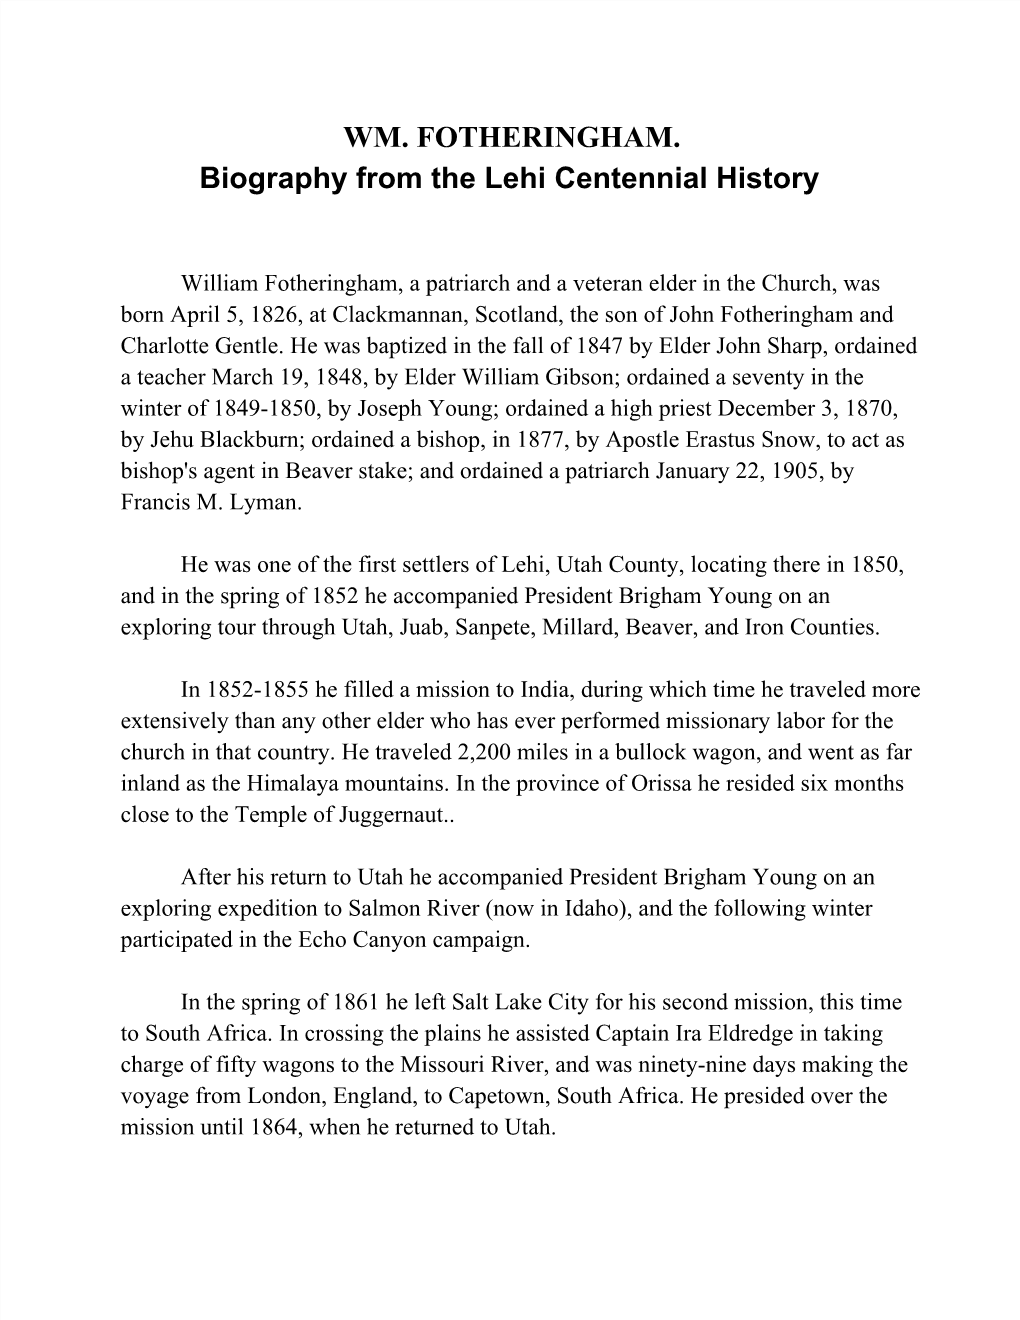 WM. FOTHERINGHAM. Biography from the Lehi Centennial History